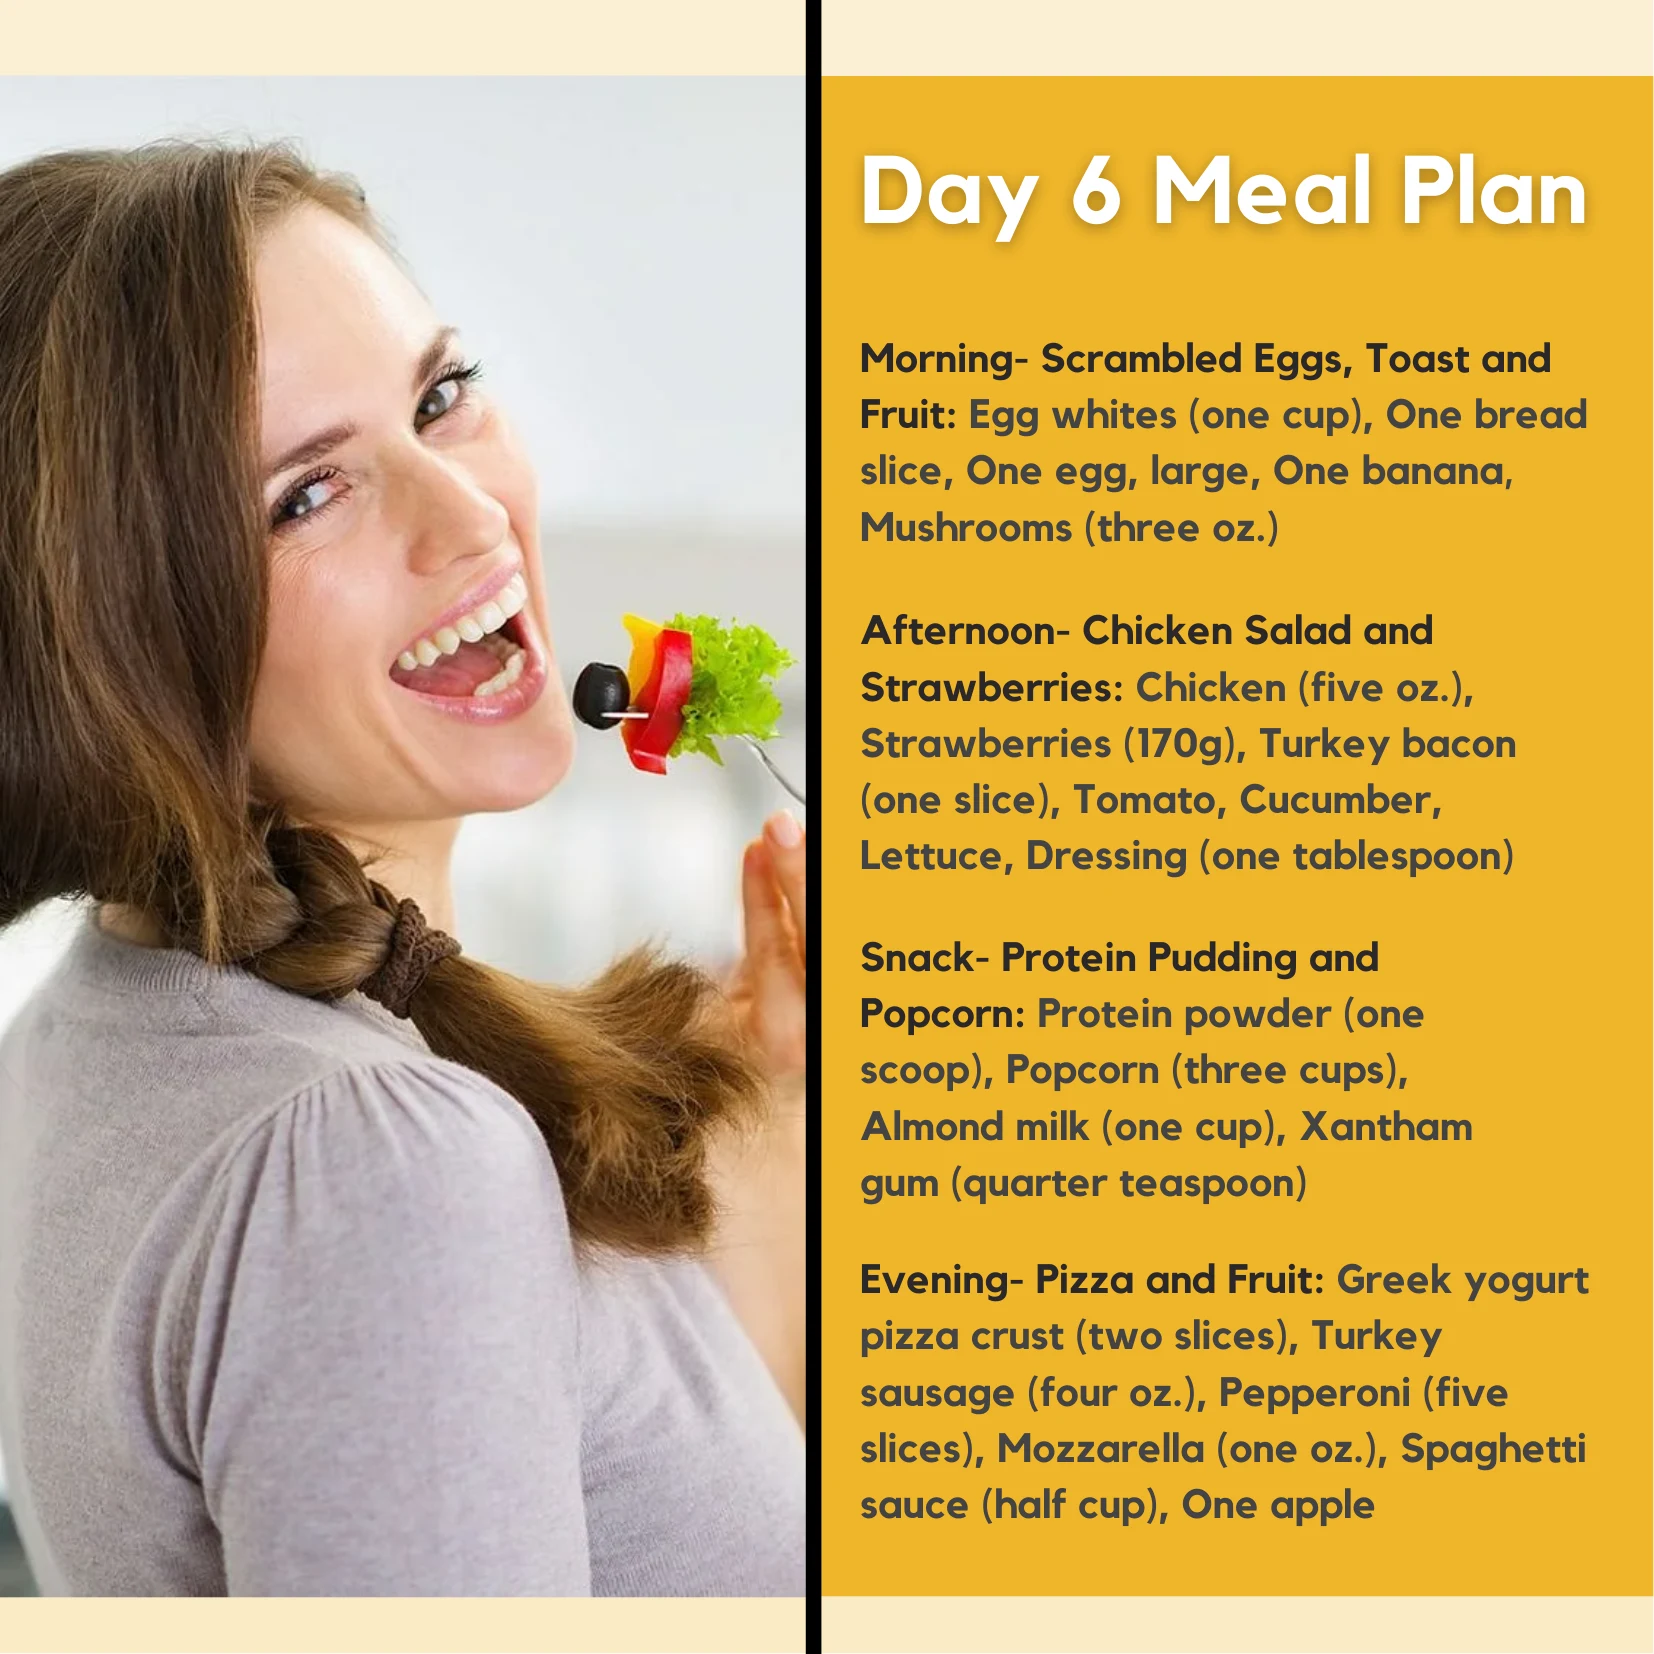 Day 6 Meal Plan